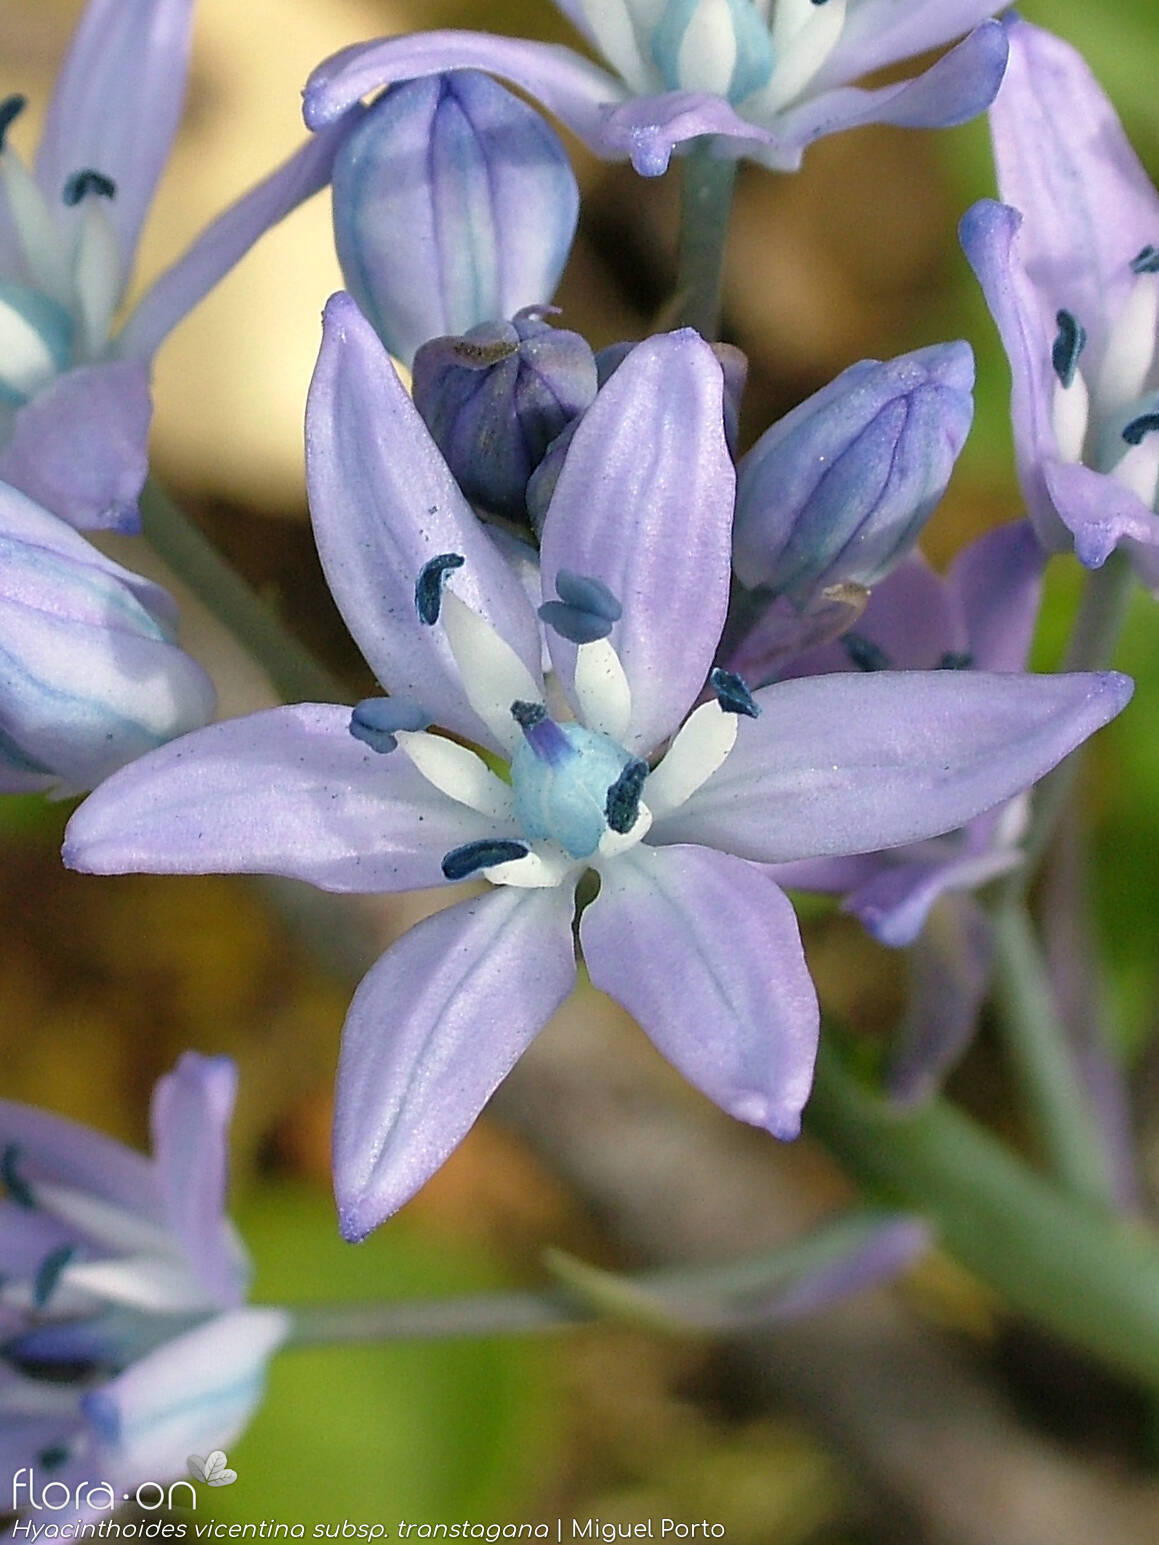 Hyacinthoides vicentina - Flor (close-up) | Miguel Porto; CC BY-NC 4.0